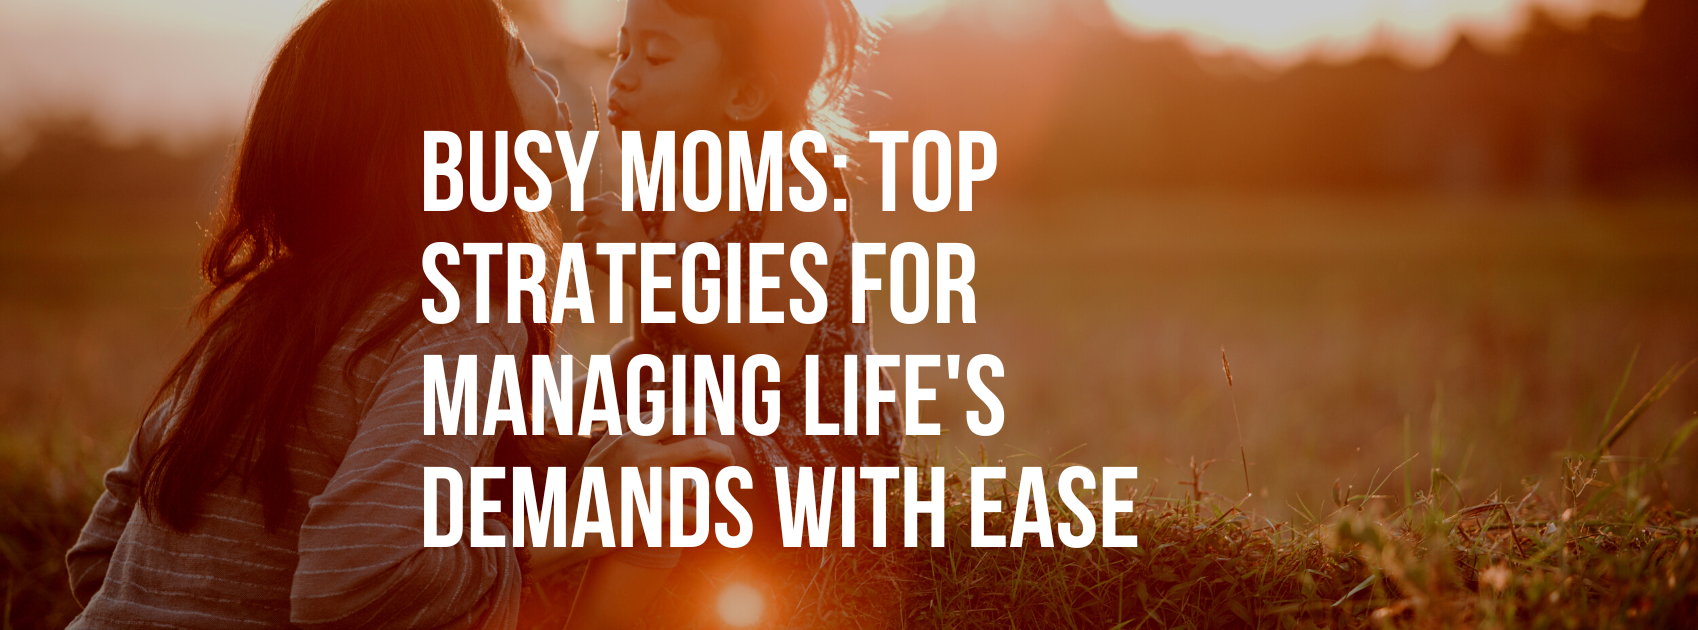 Busy Moms: Top Strategies for Managing Life's Demands with Ease